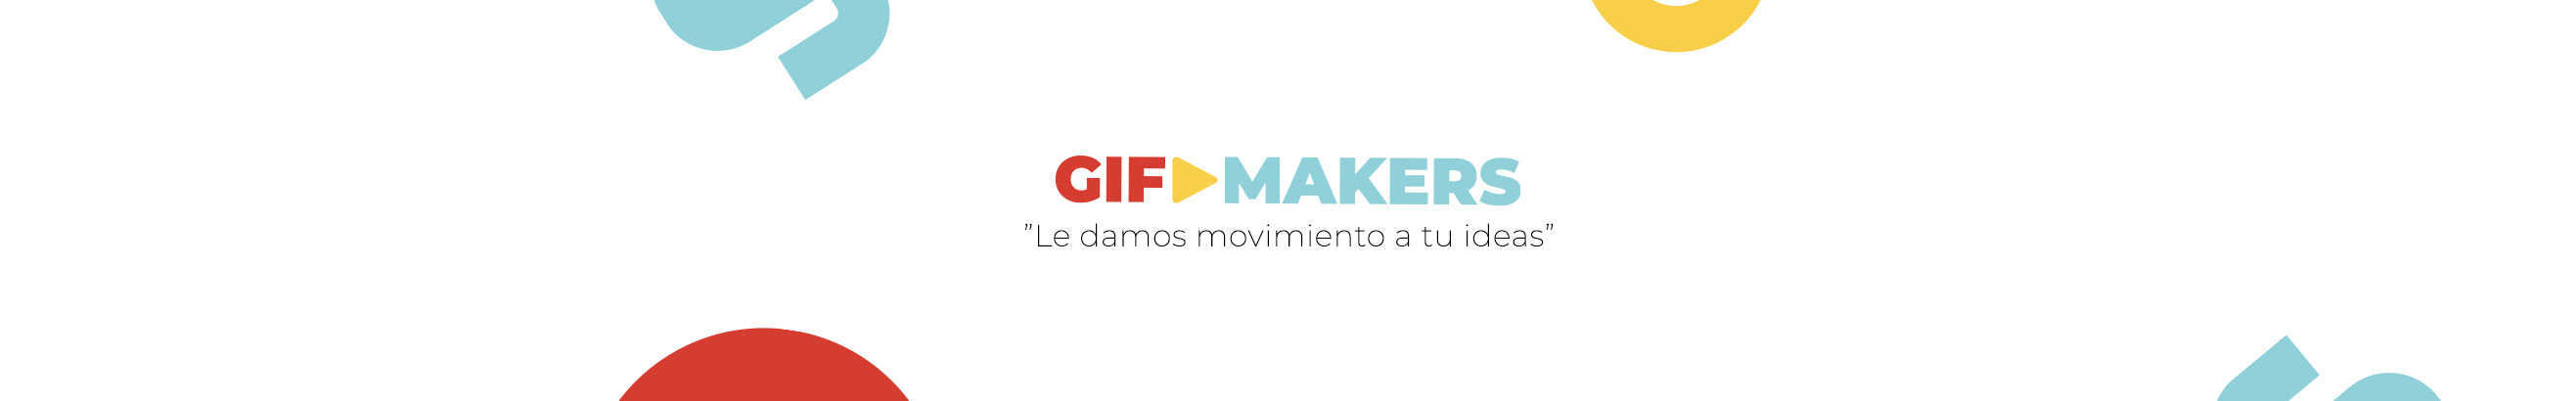 Gif Makers's profile banner